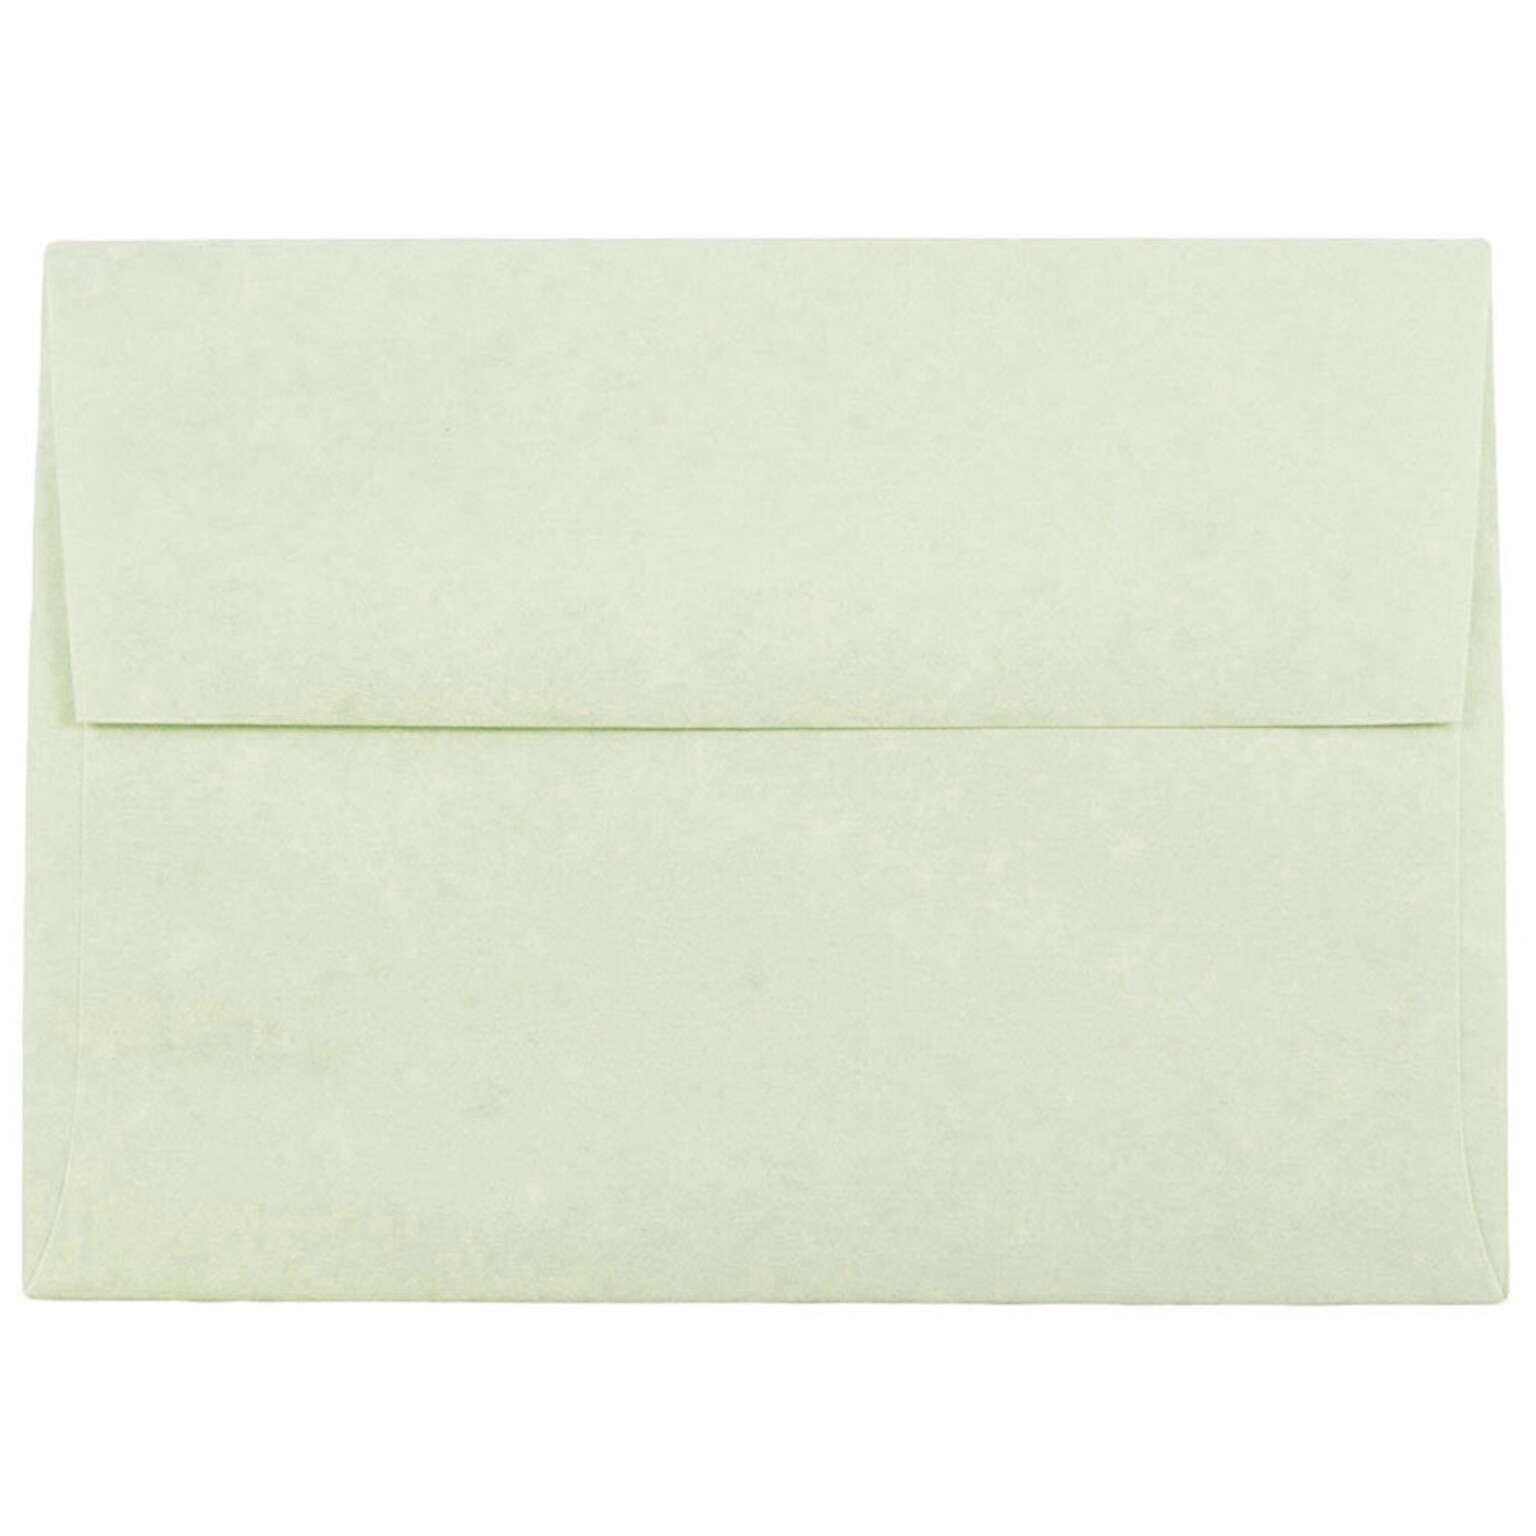 JAM Paper® A6 Parchment Invitation Envelopes, 4.75 x 6.5, Green Recycled, 25/Pack (13278)